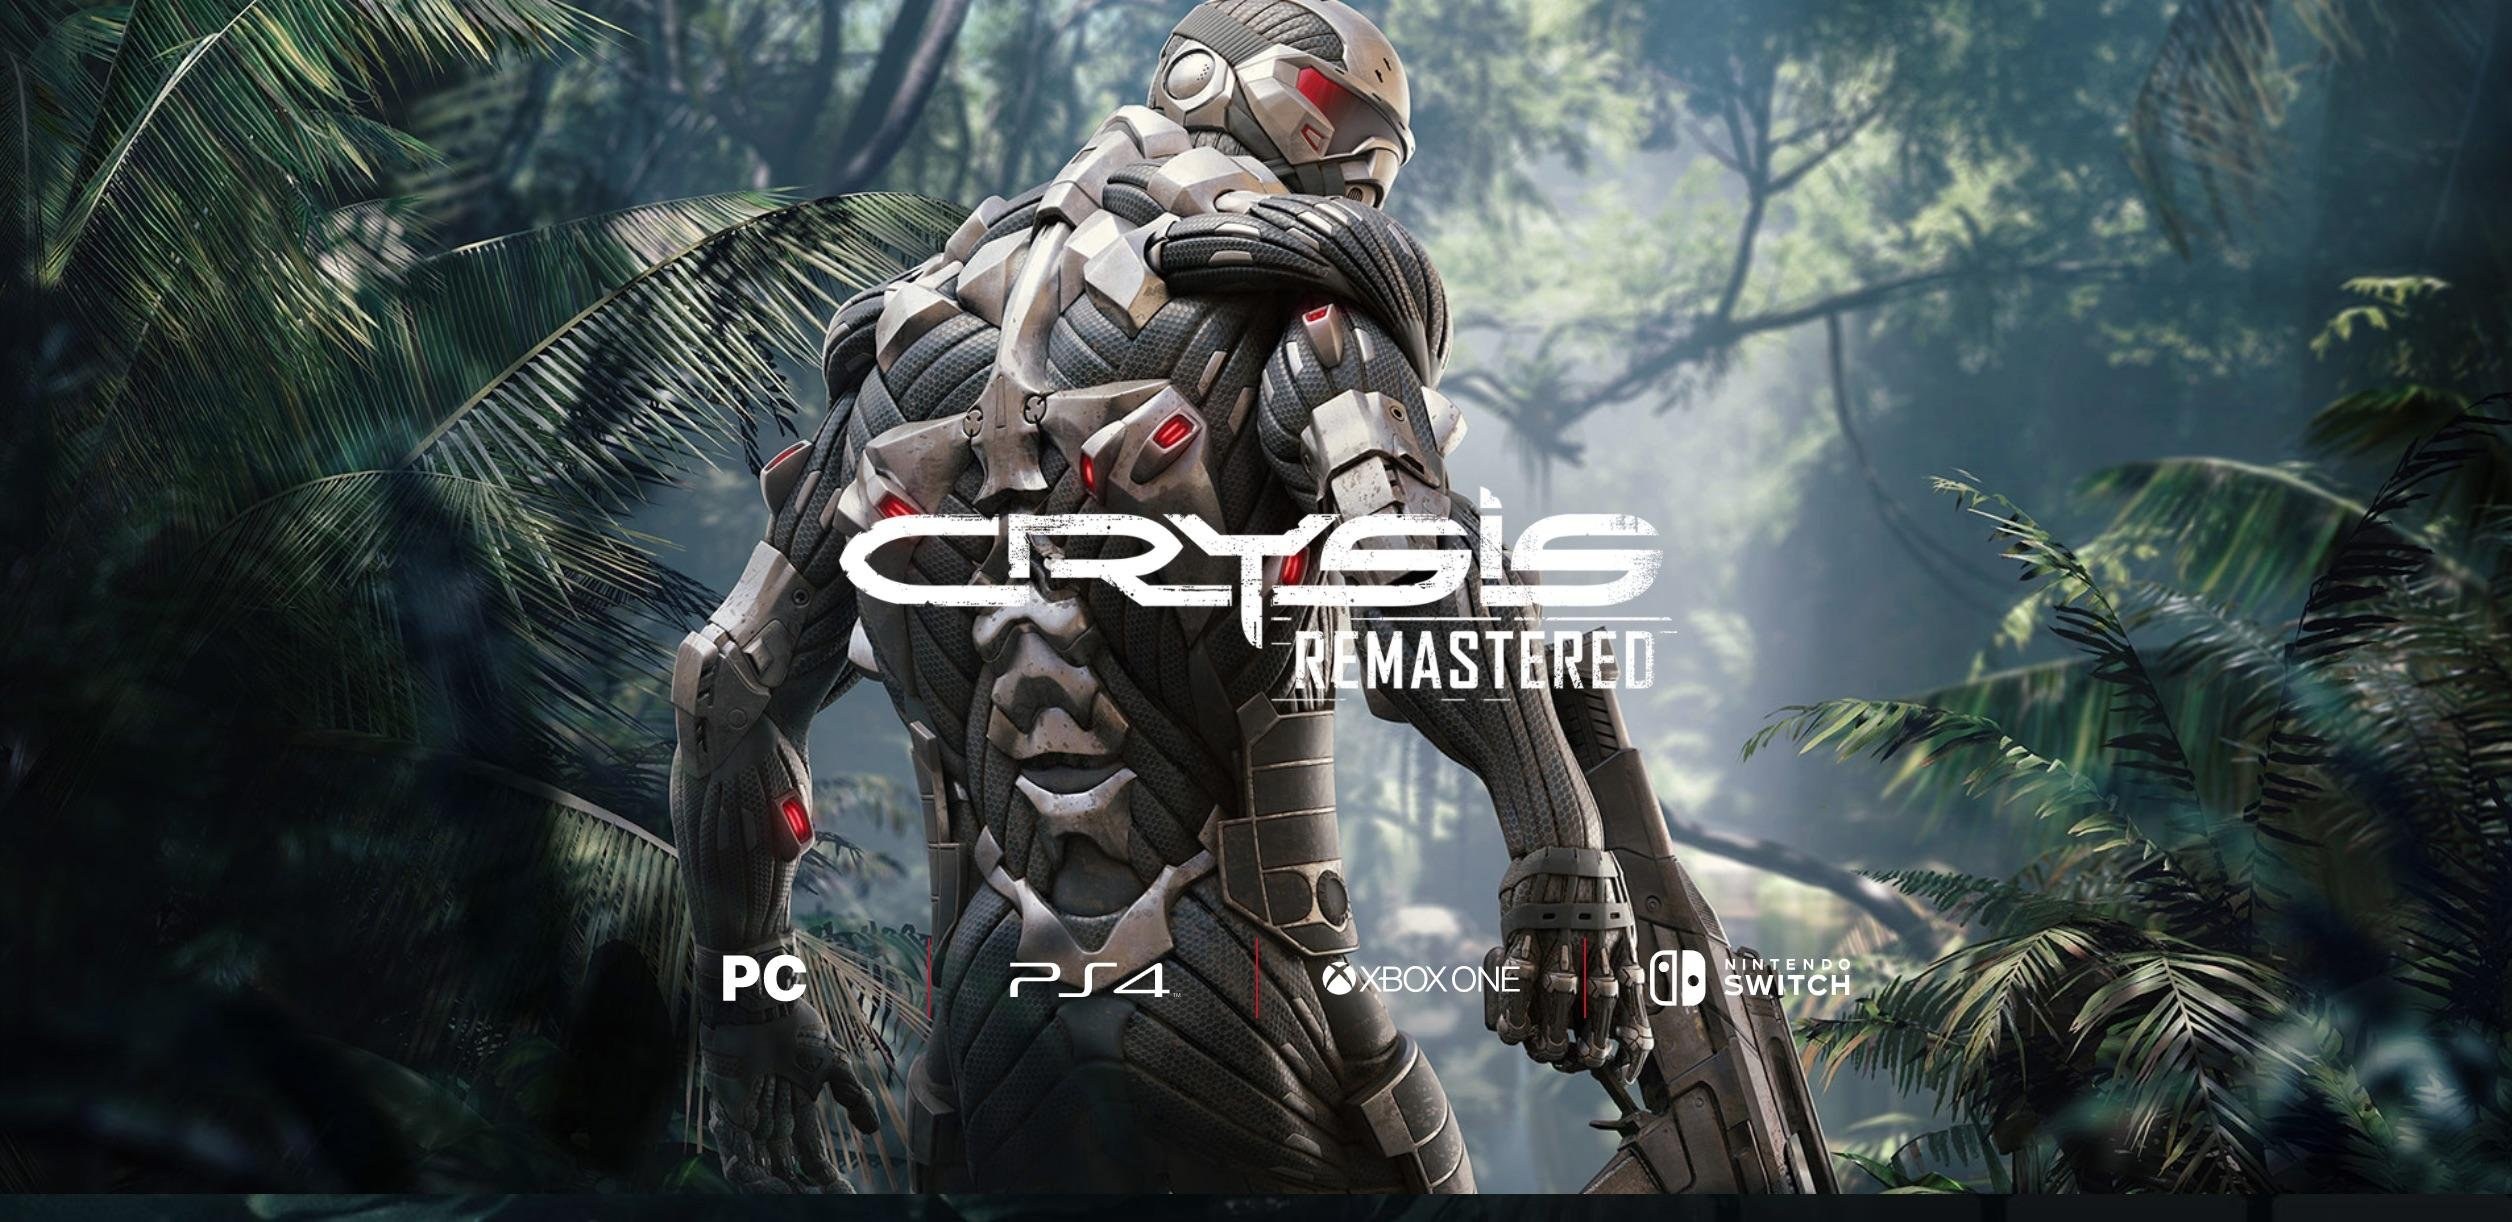 Crysis Remaster delayed by a few weeks, early trailer leaked